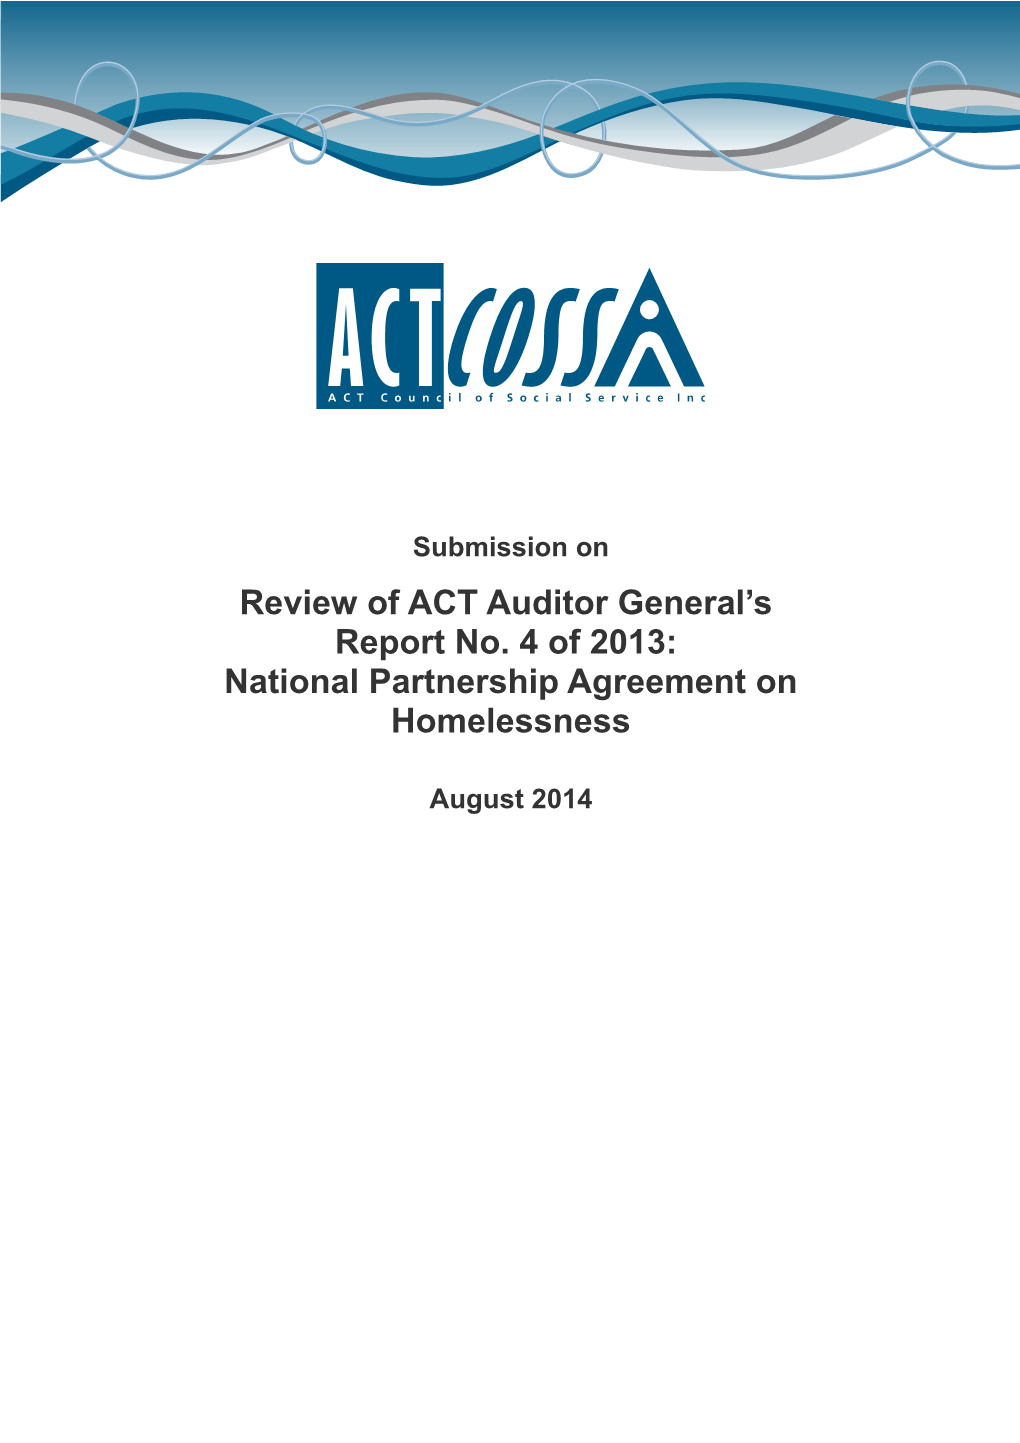 Review of ACT Auditor General S Report No. 4 of 2013: National Partnership Agreement On